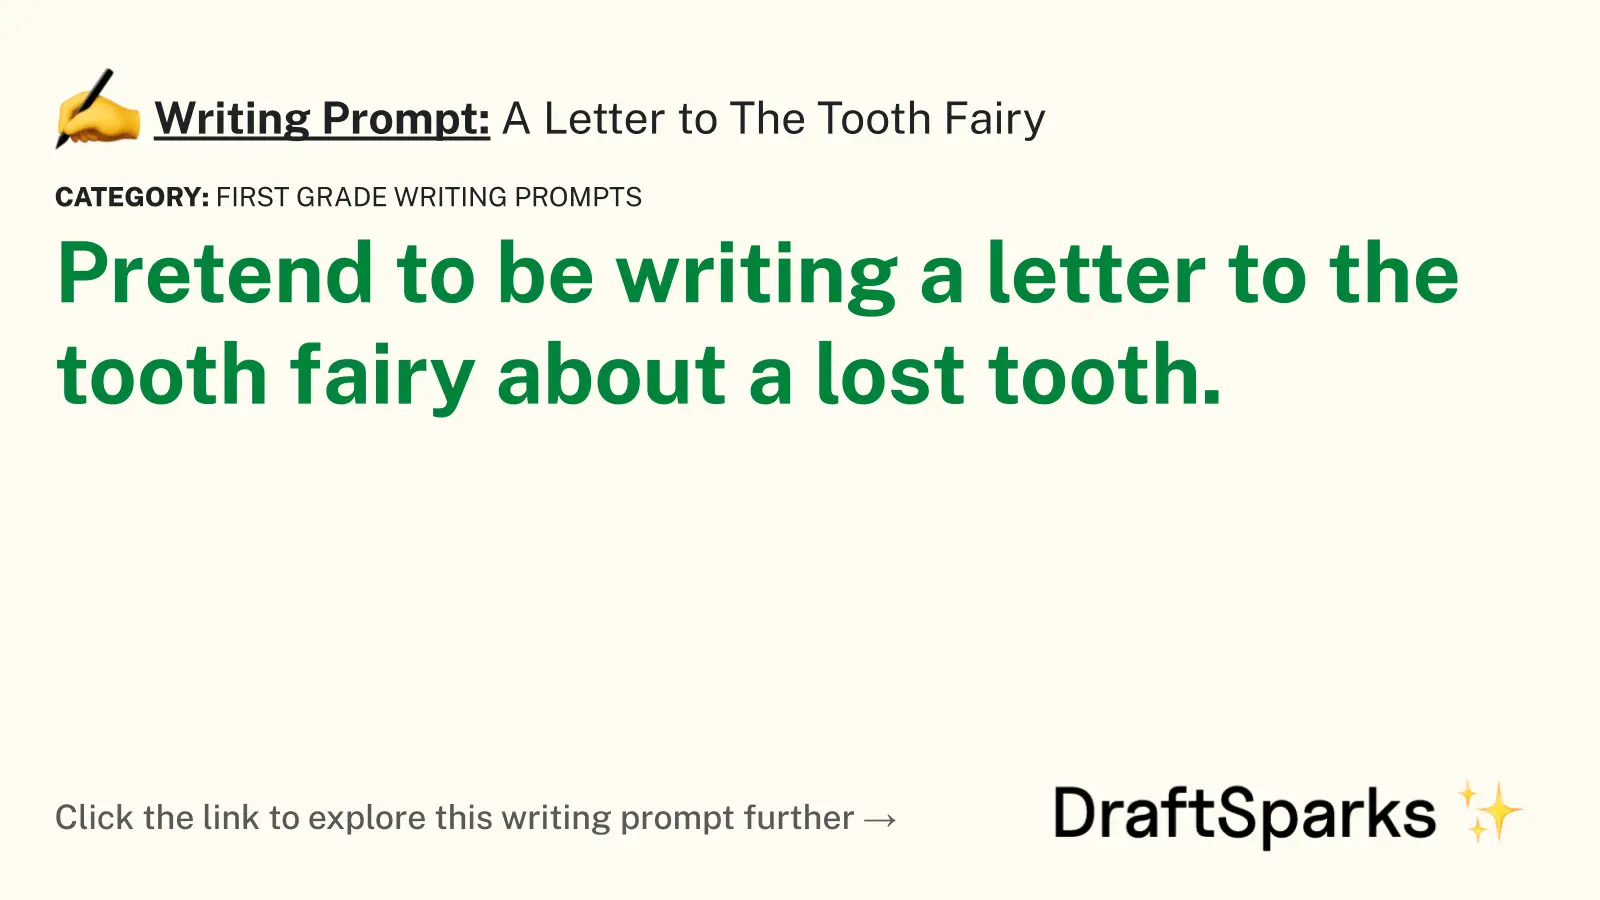 A Letter to The Tooth Fairy